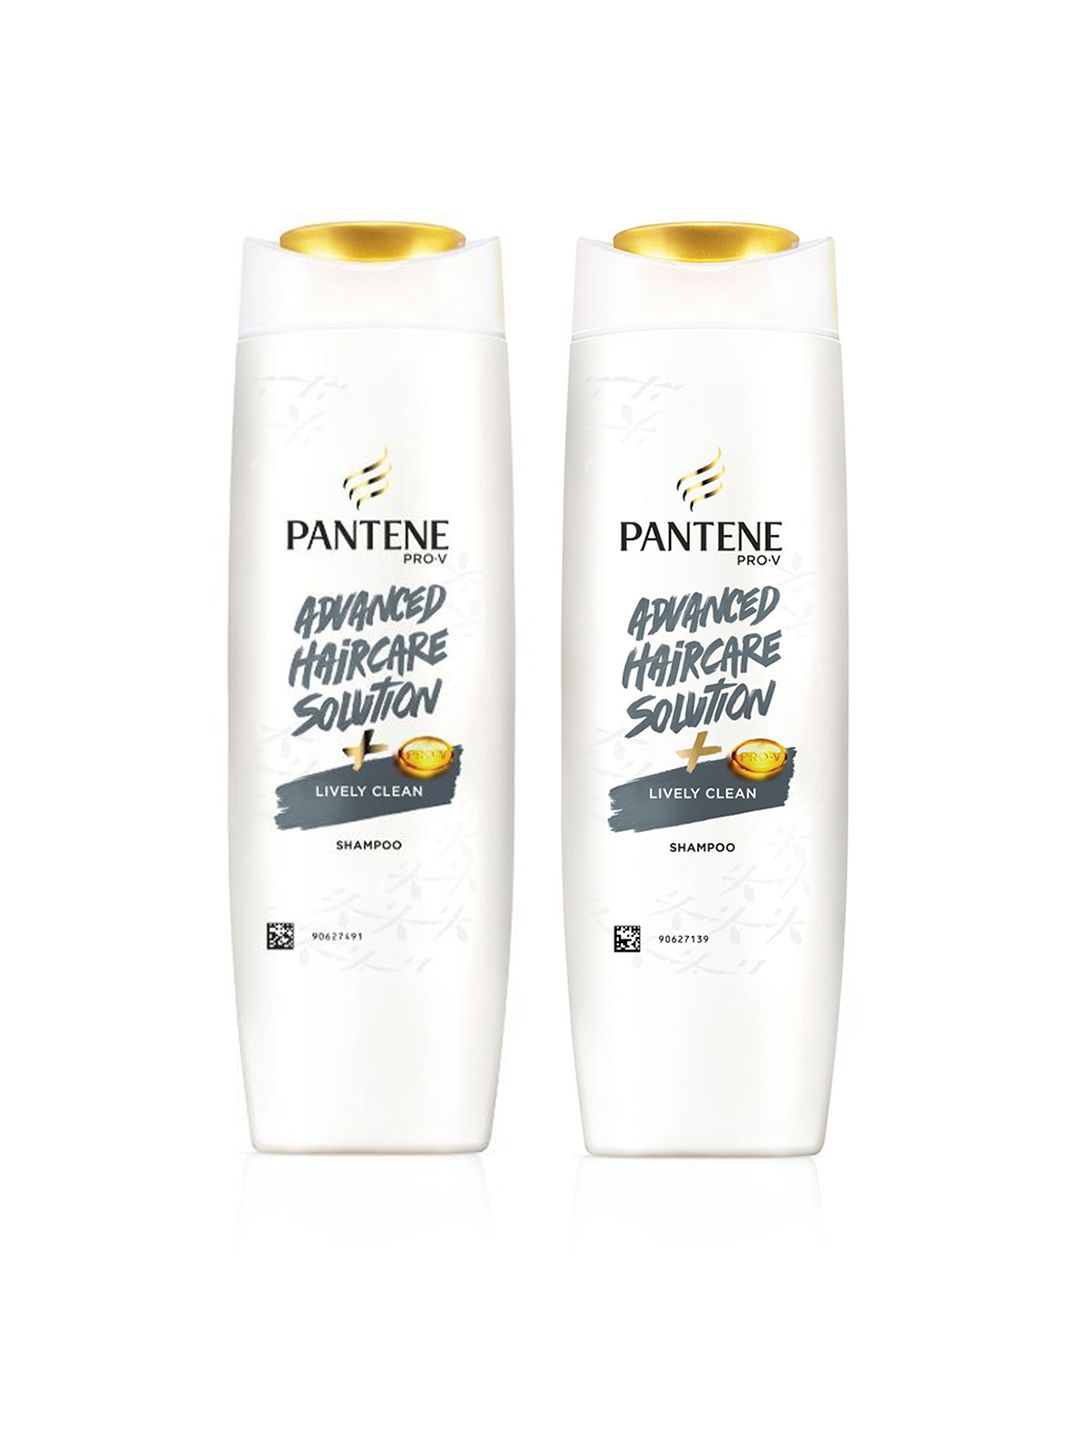 Pantene Set of 2 Advanced Hair Care Solution Lively Clean Shampoo Price in India